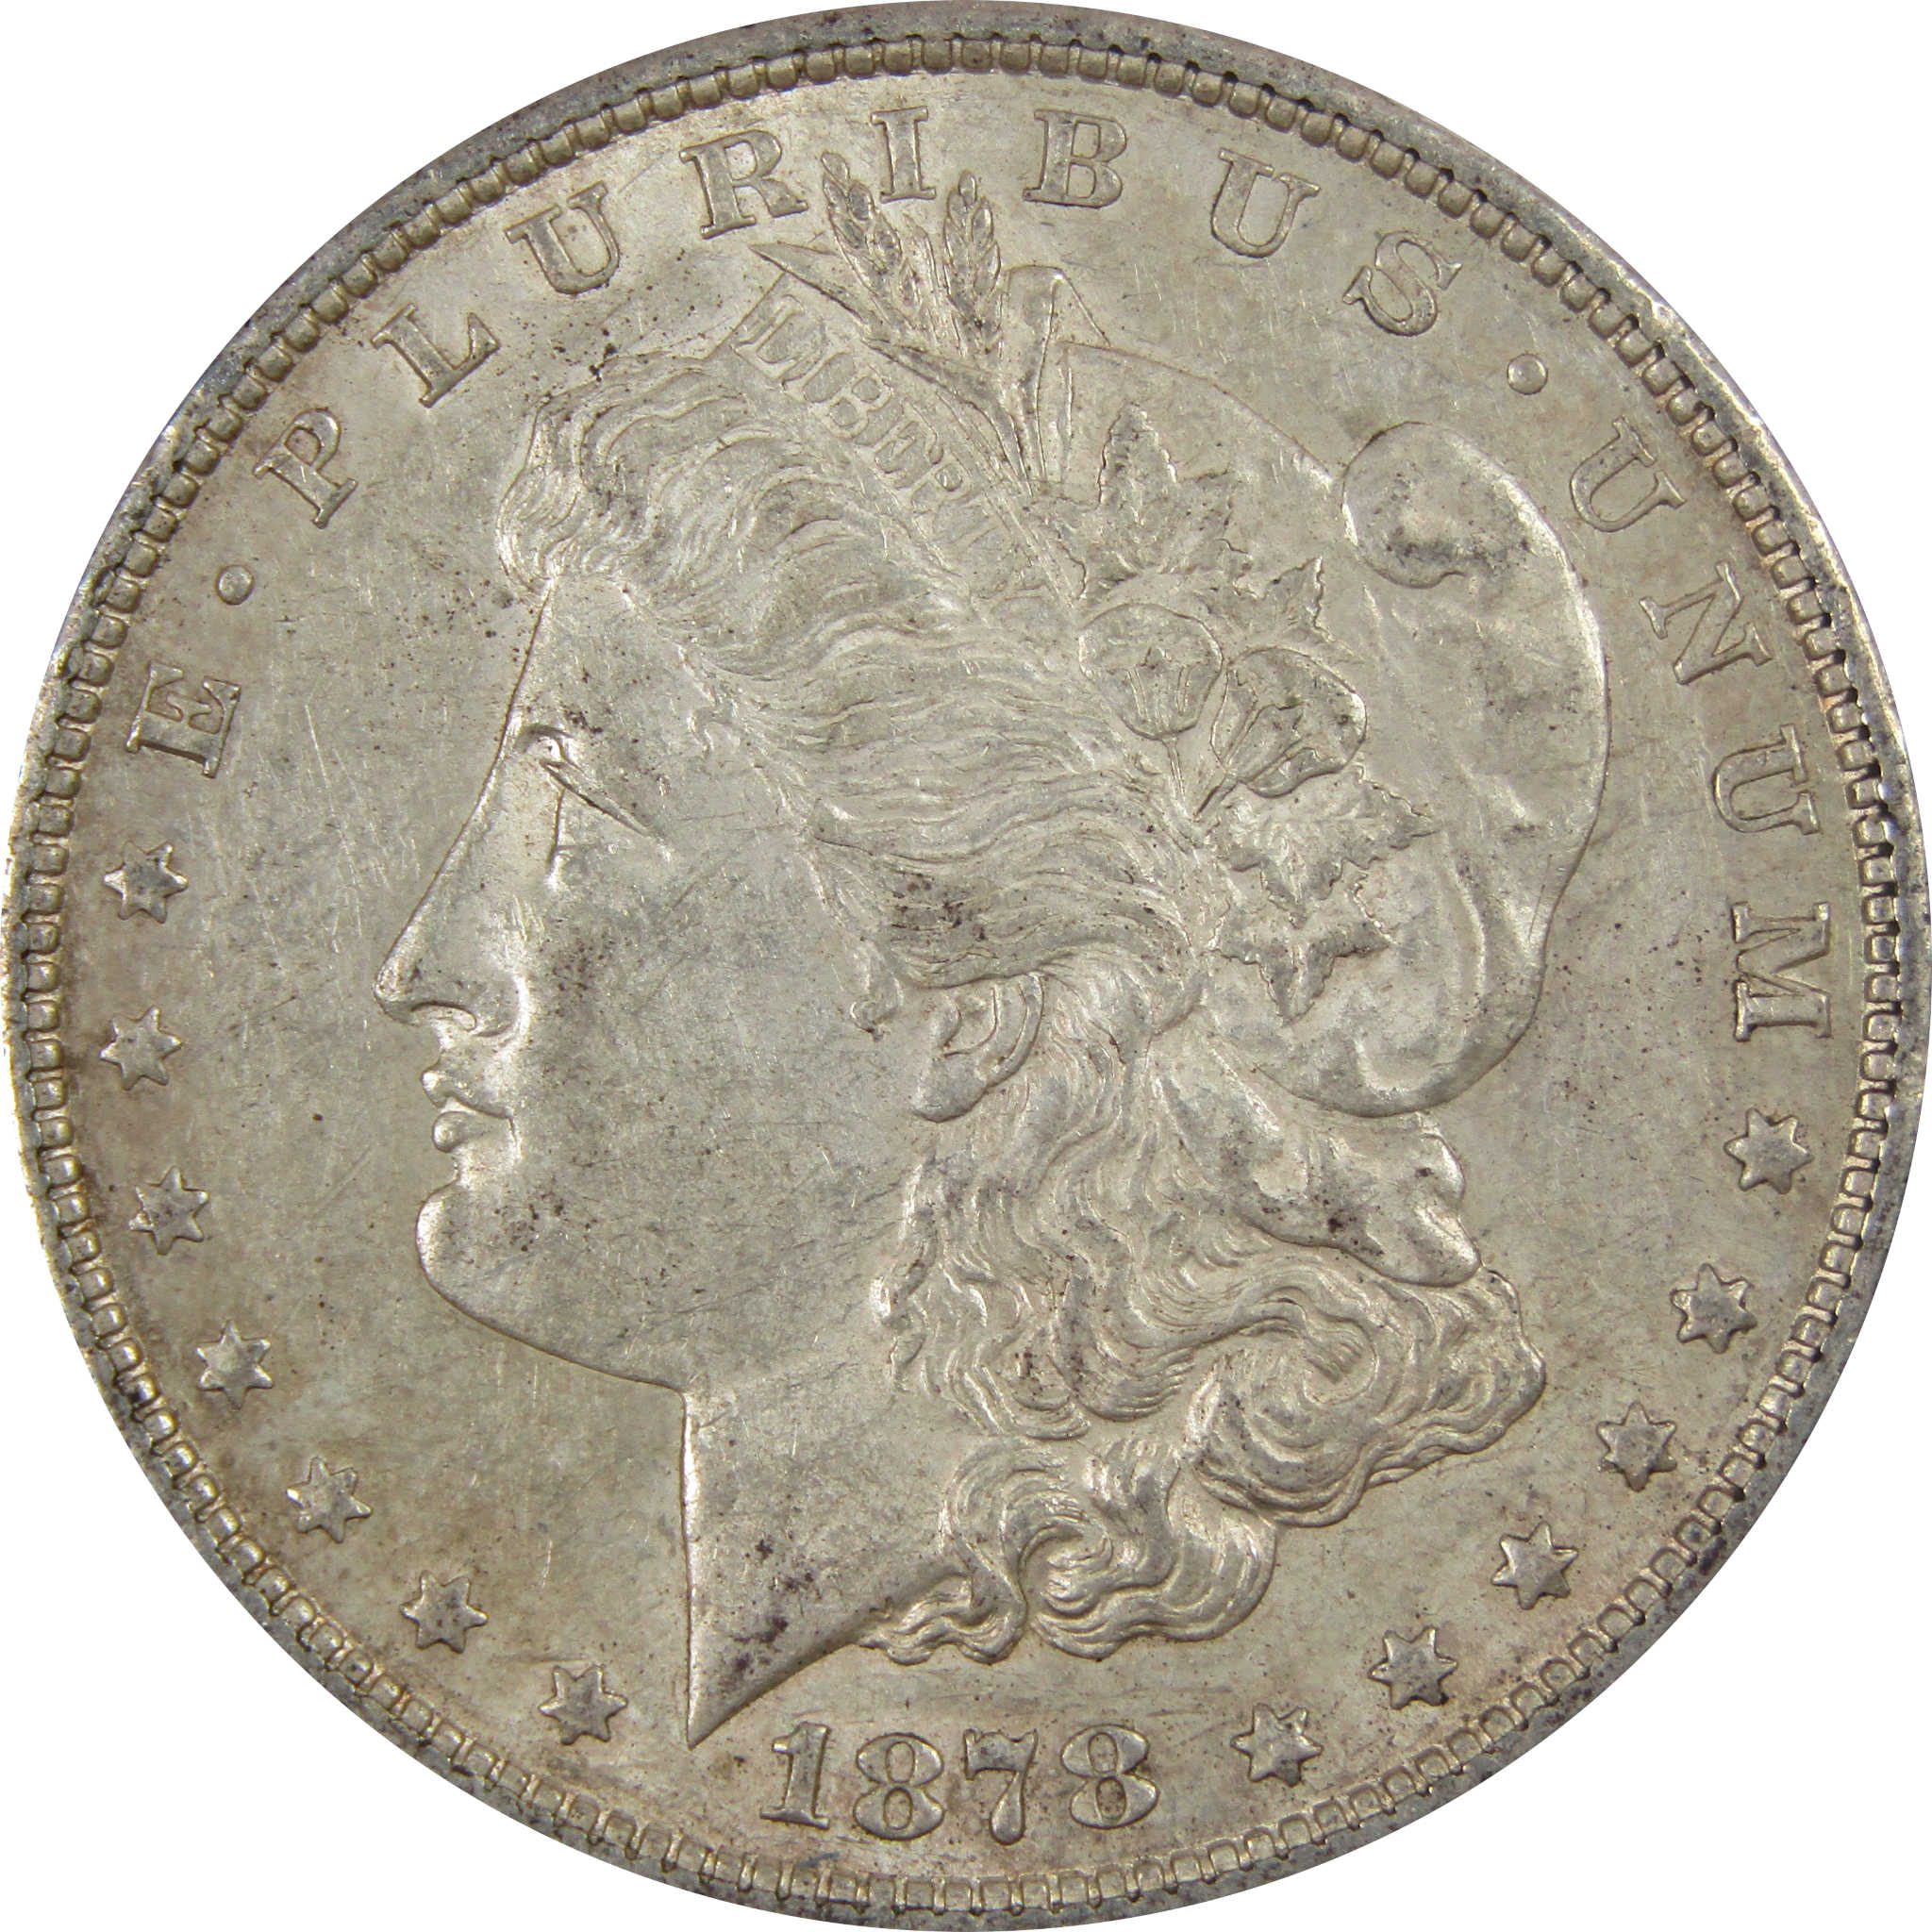 1878 S Morgan Dollar XF EF Extremely Fine 90% Silver $1 Coin SKU:I7010 - Morgan coin - Morgan silver dollar - Morgan silver dollar for sale - Profile Coins &amp; Collectibles